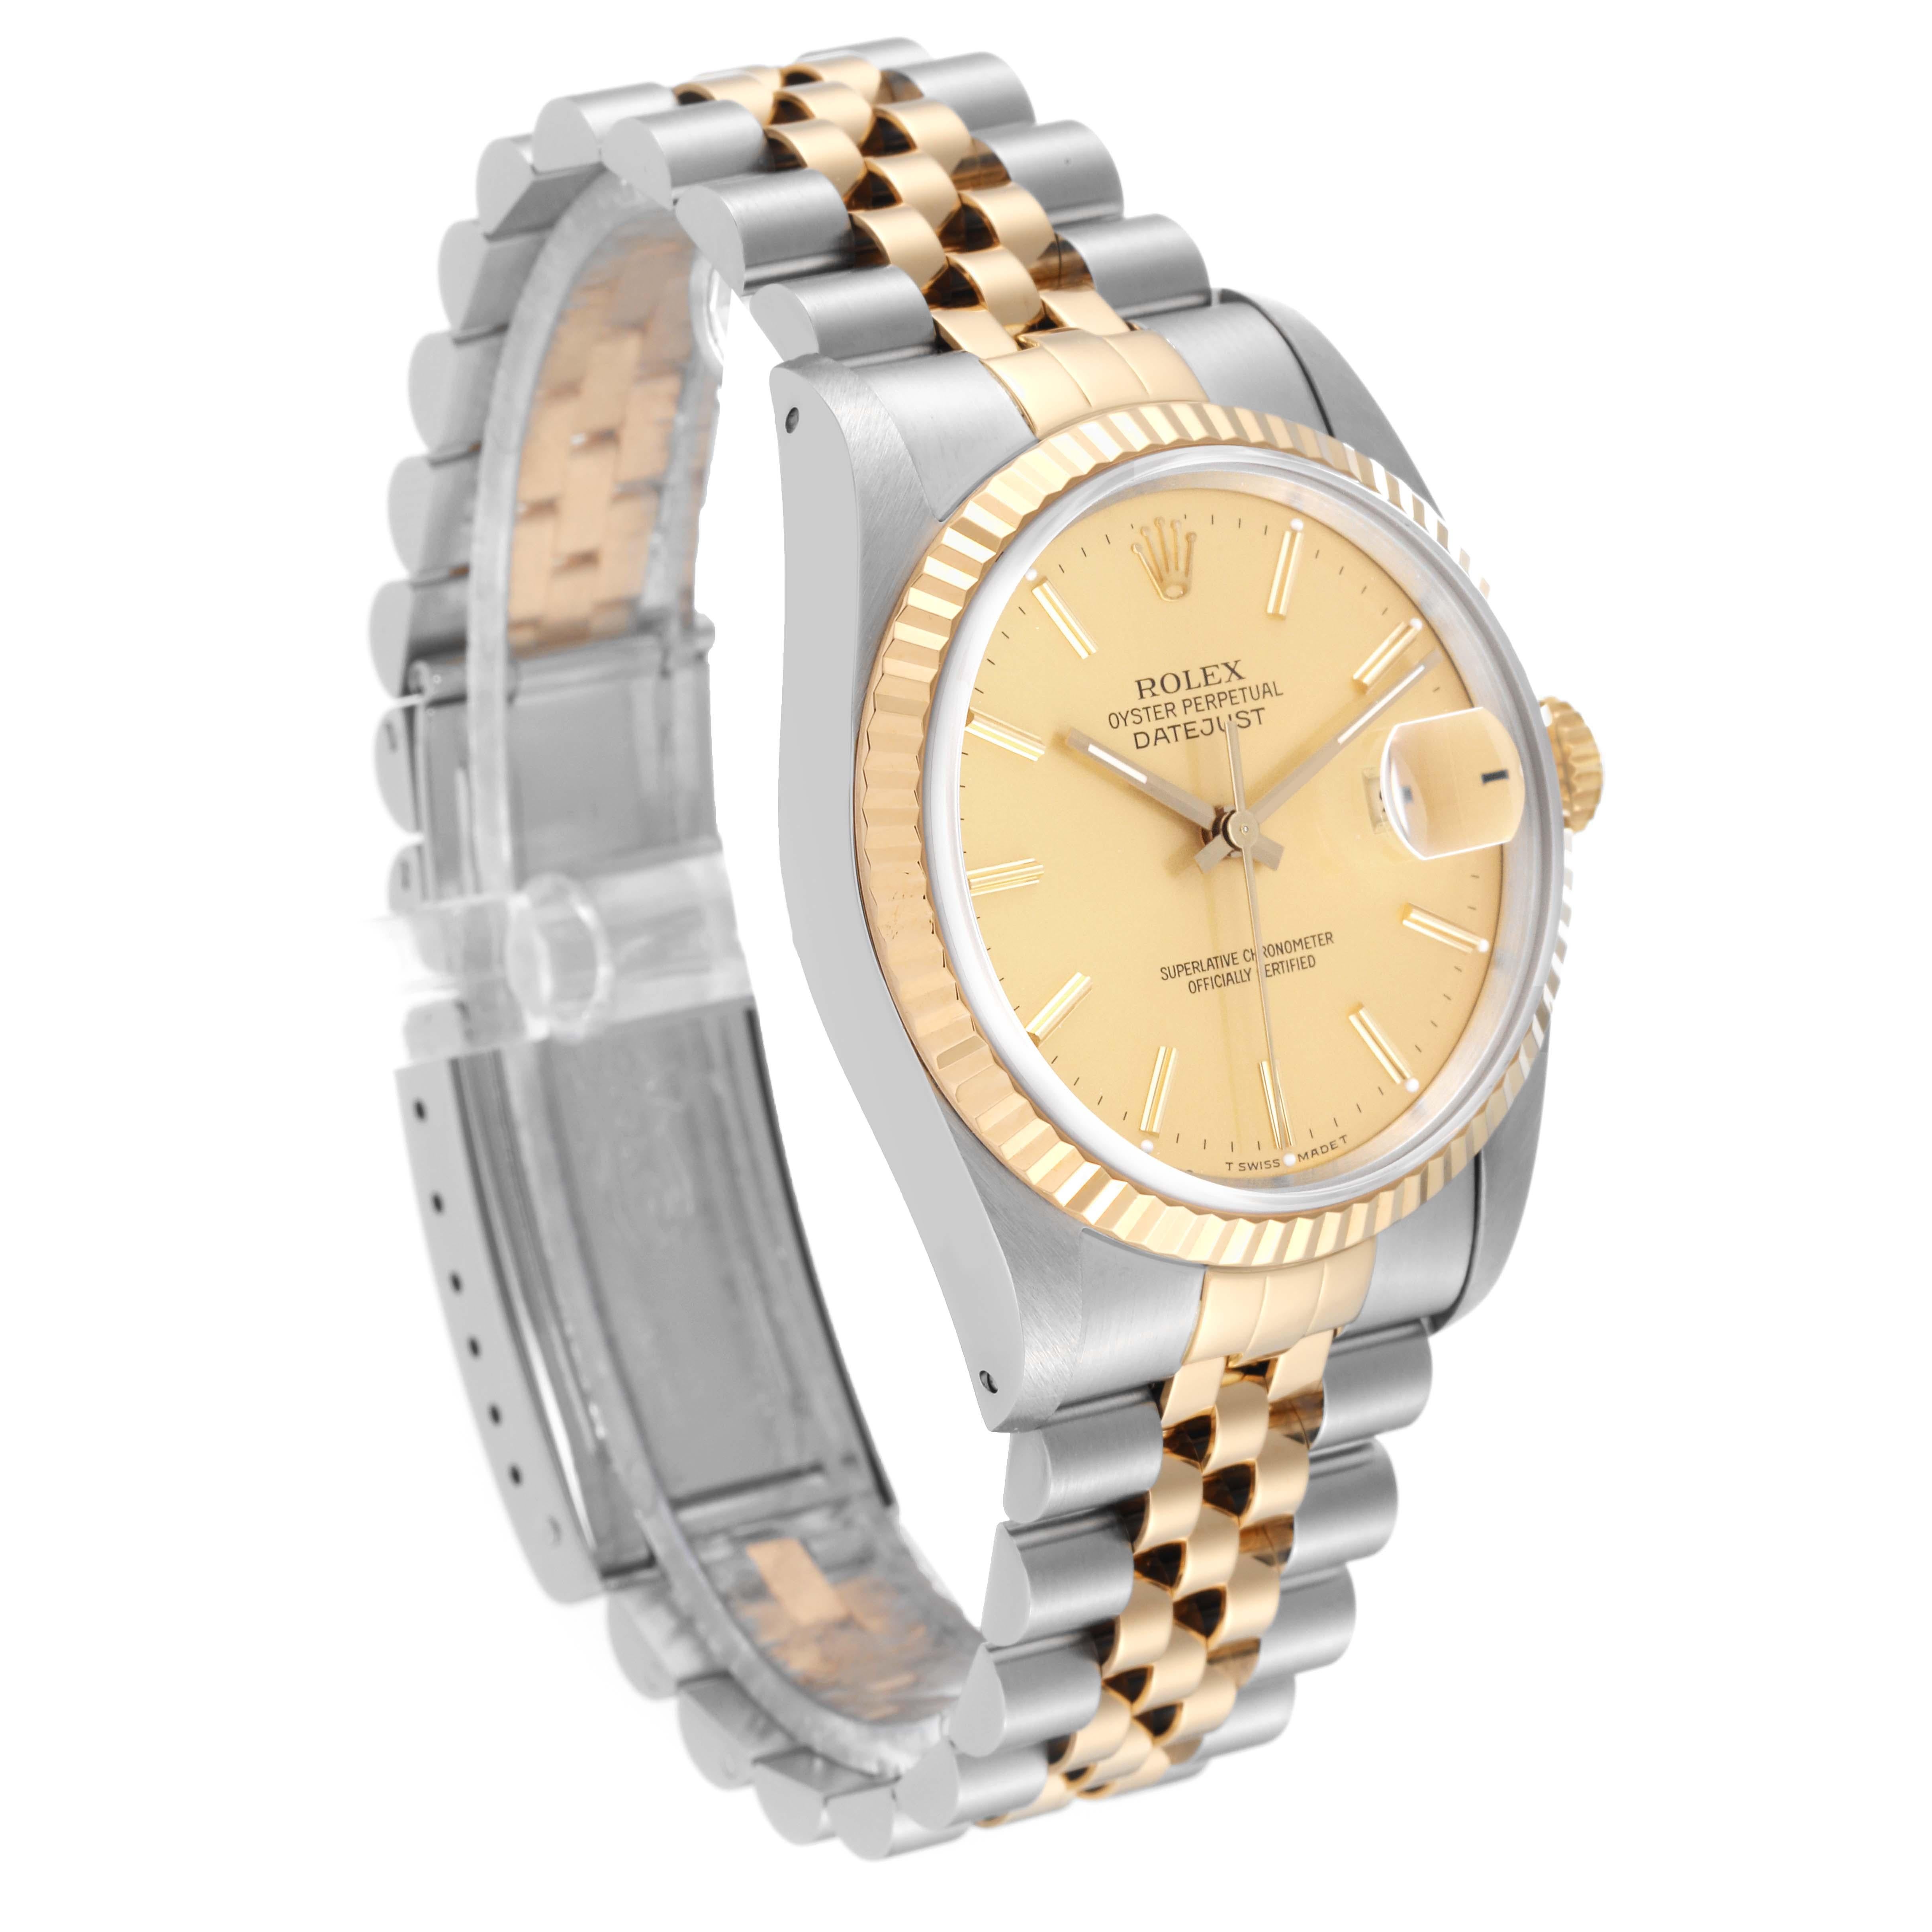 Rolex Datejust 36 Steel Yellow Gold Champagne Dial Mens Watch 16233 Box Papers For Sale 3